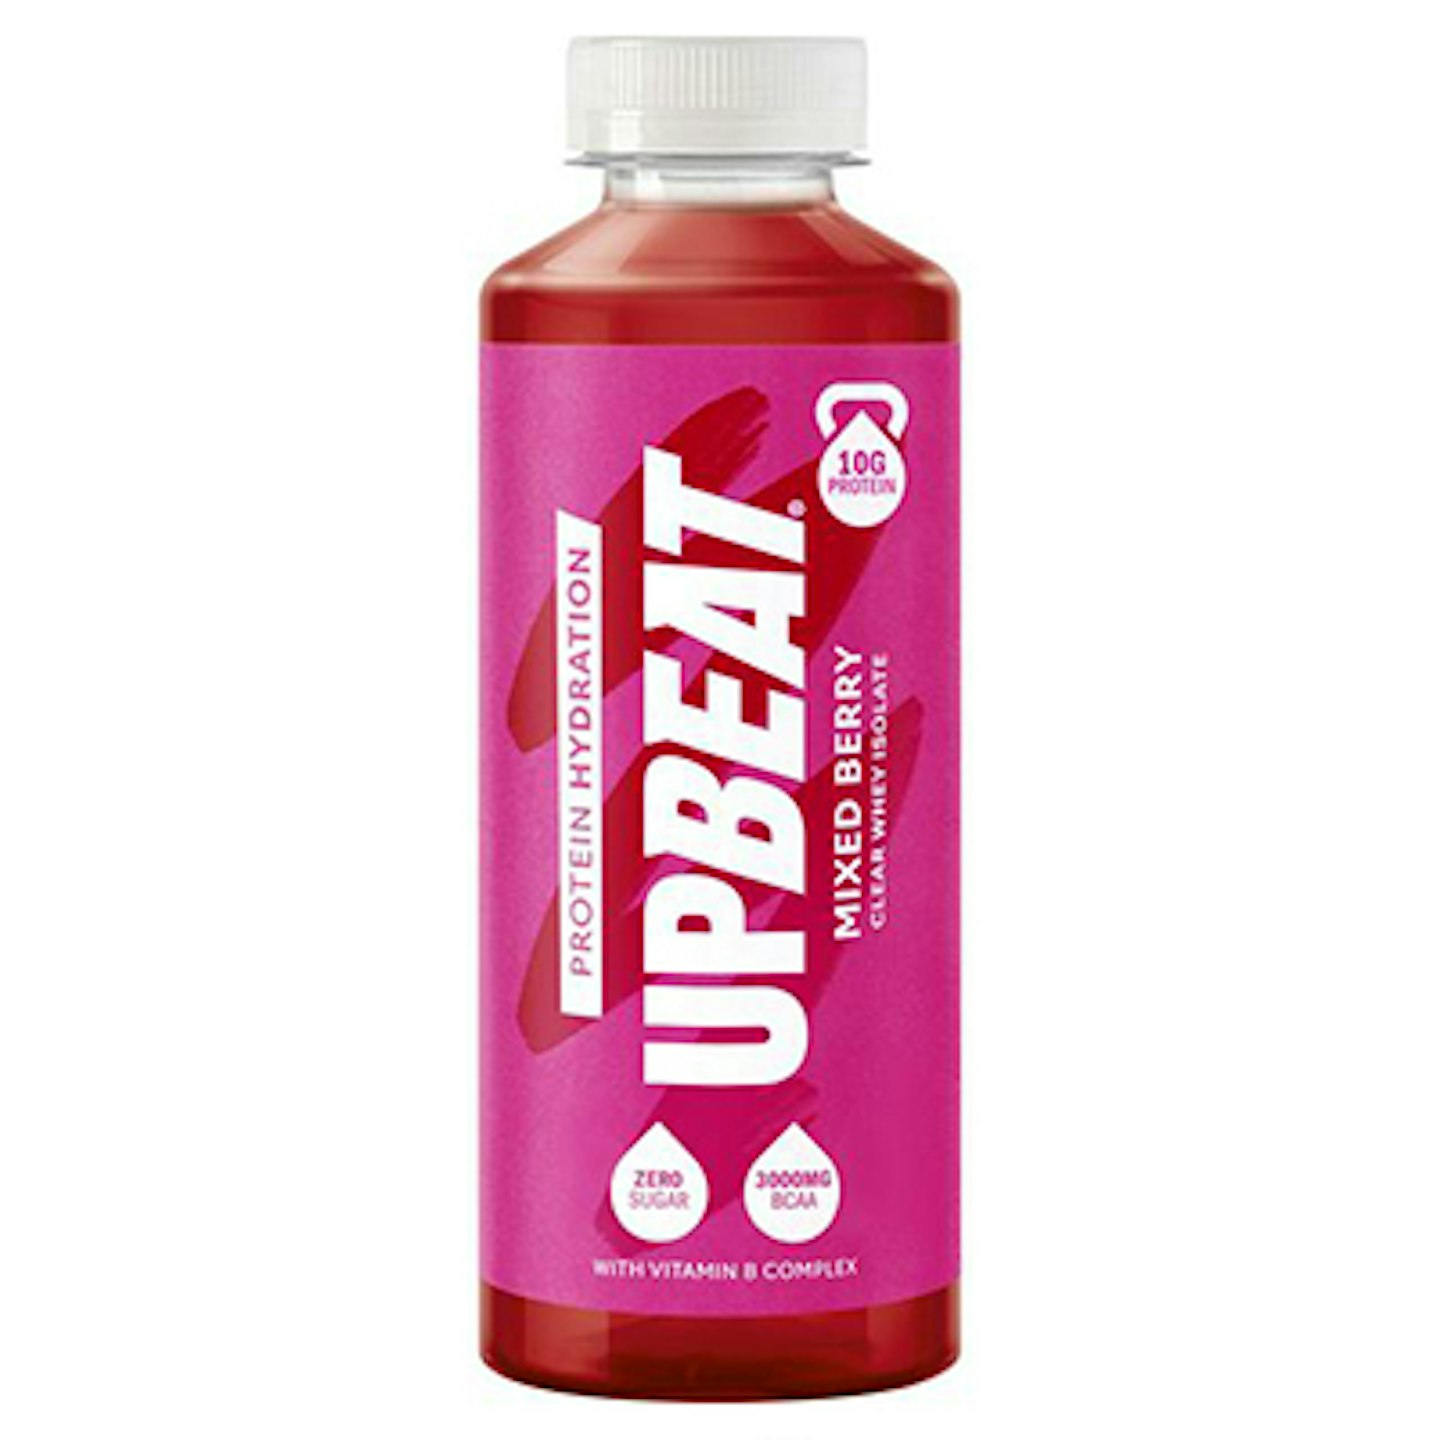 Upbeat mixed berry water